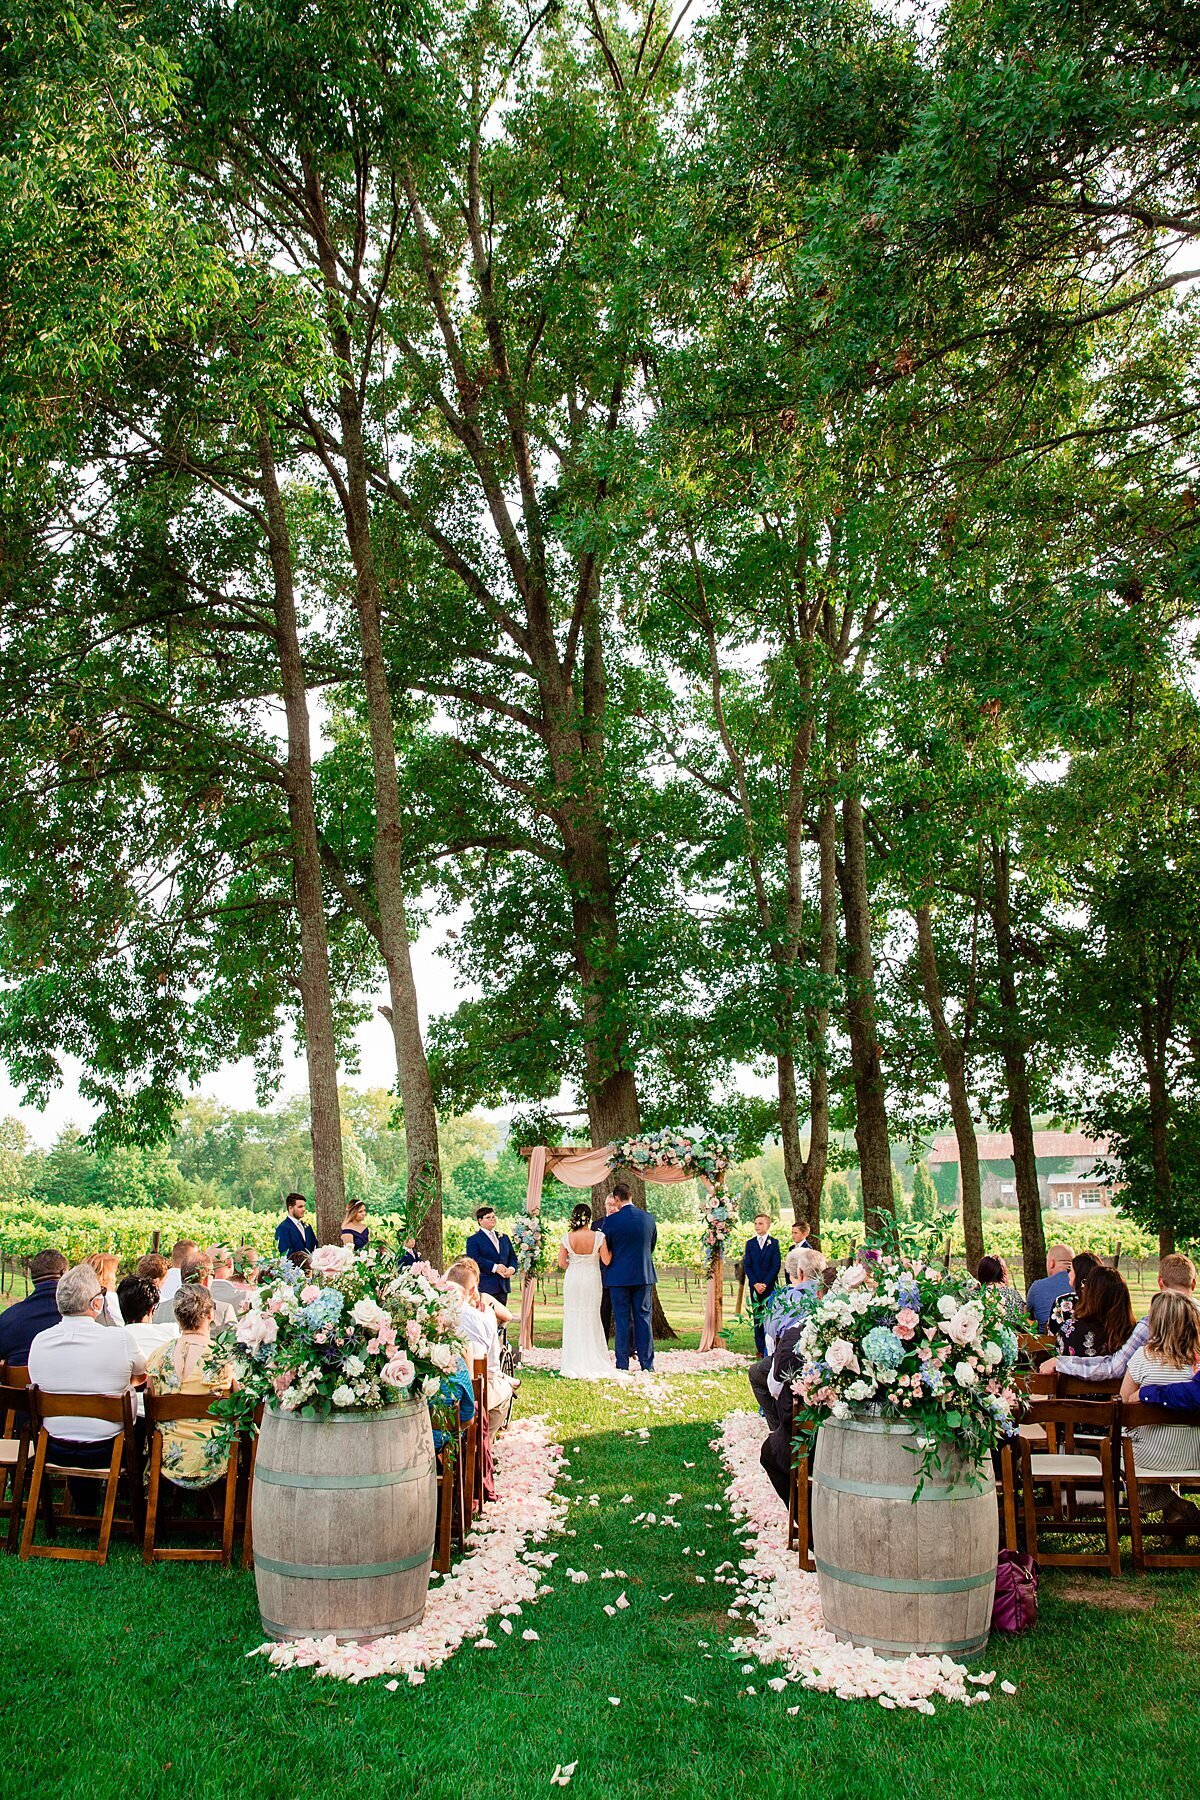 Wedding guests seated in brown fruit wood chairs watch the bride and groom exchange vows at their Arrington Vineyard wedding. Two wine barrels sit on either side of the aisle with large pink and blue floral arrangements. White ad blush rose petals line the center aisle and lead to a wooden arbor decorated with blush pink fabric and sprays of greenery, pink and blue flowers.